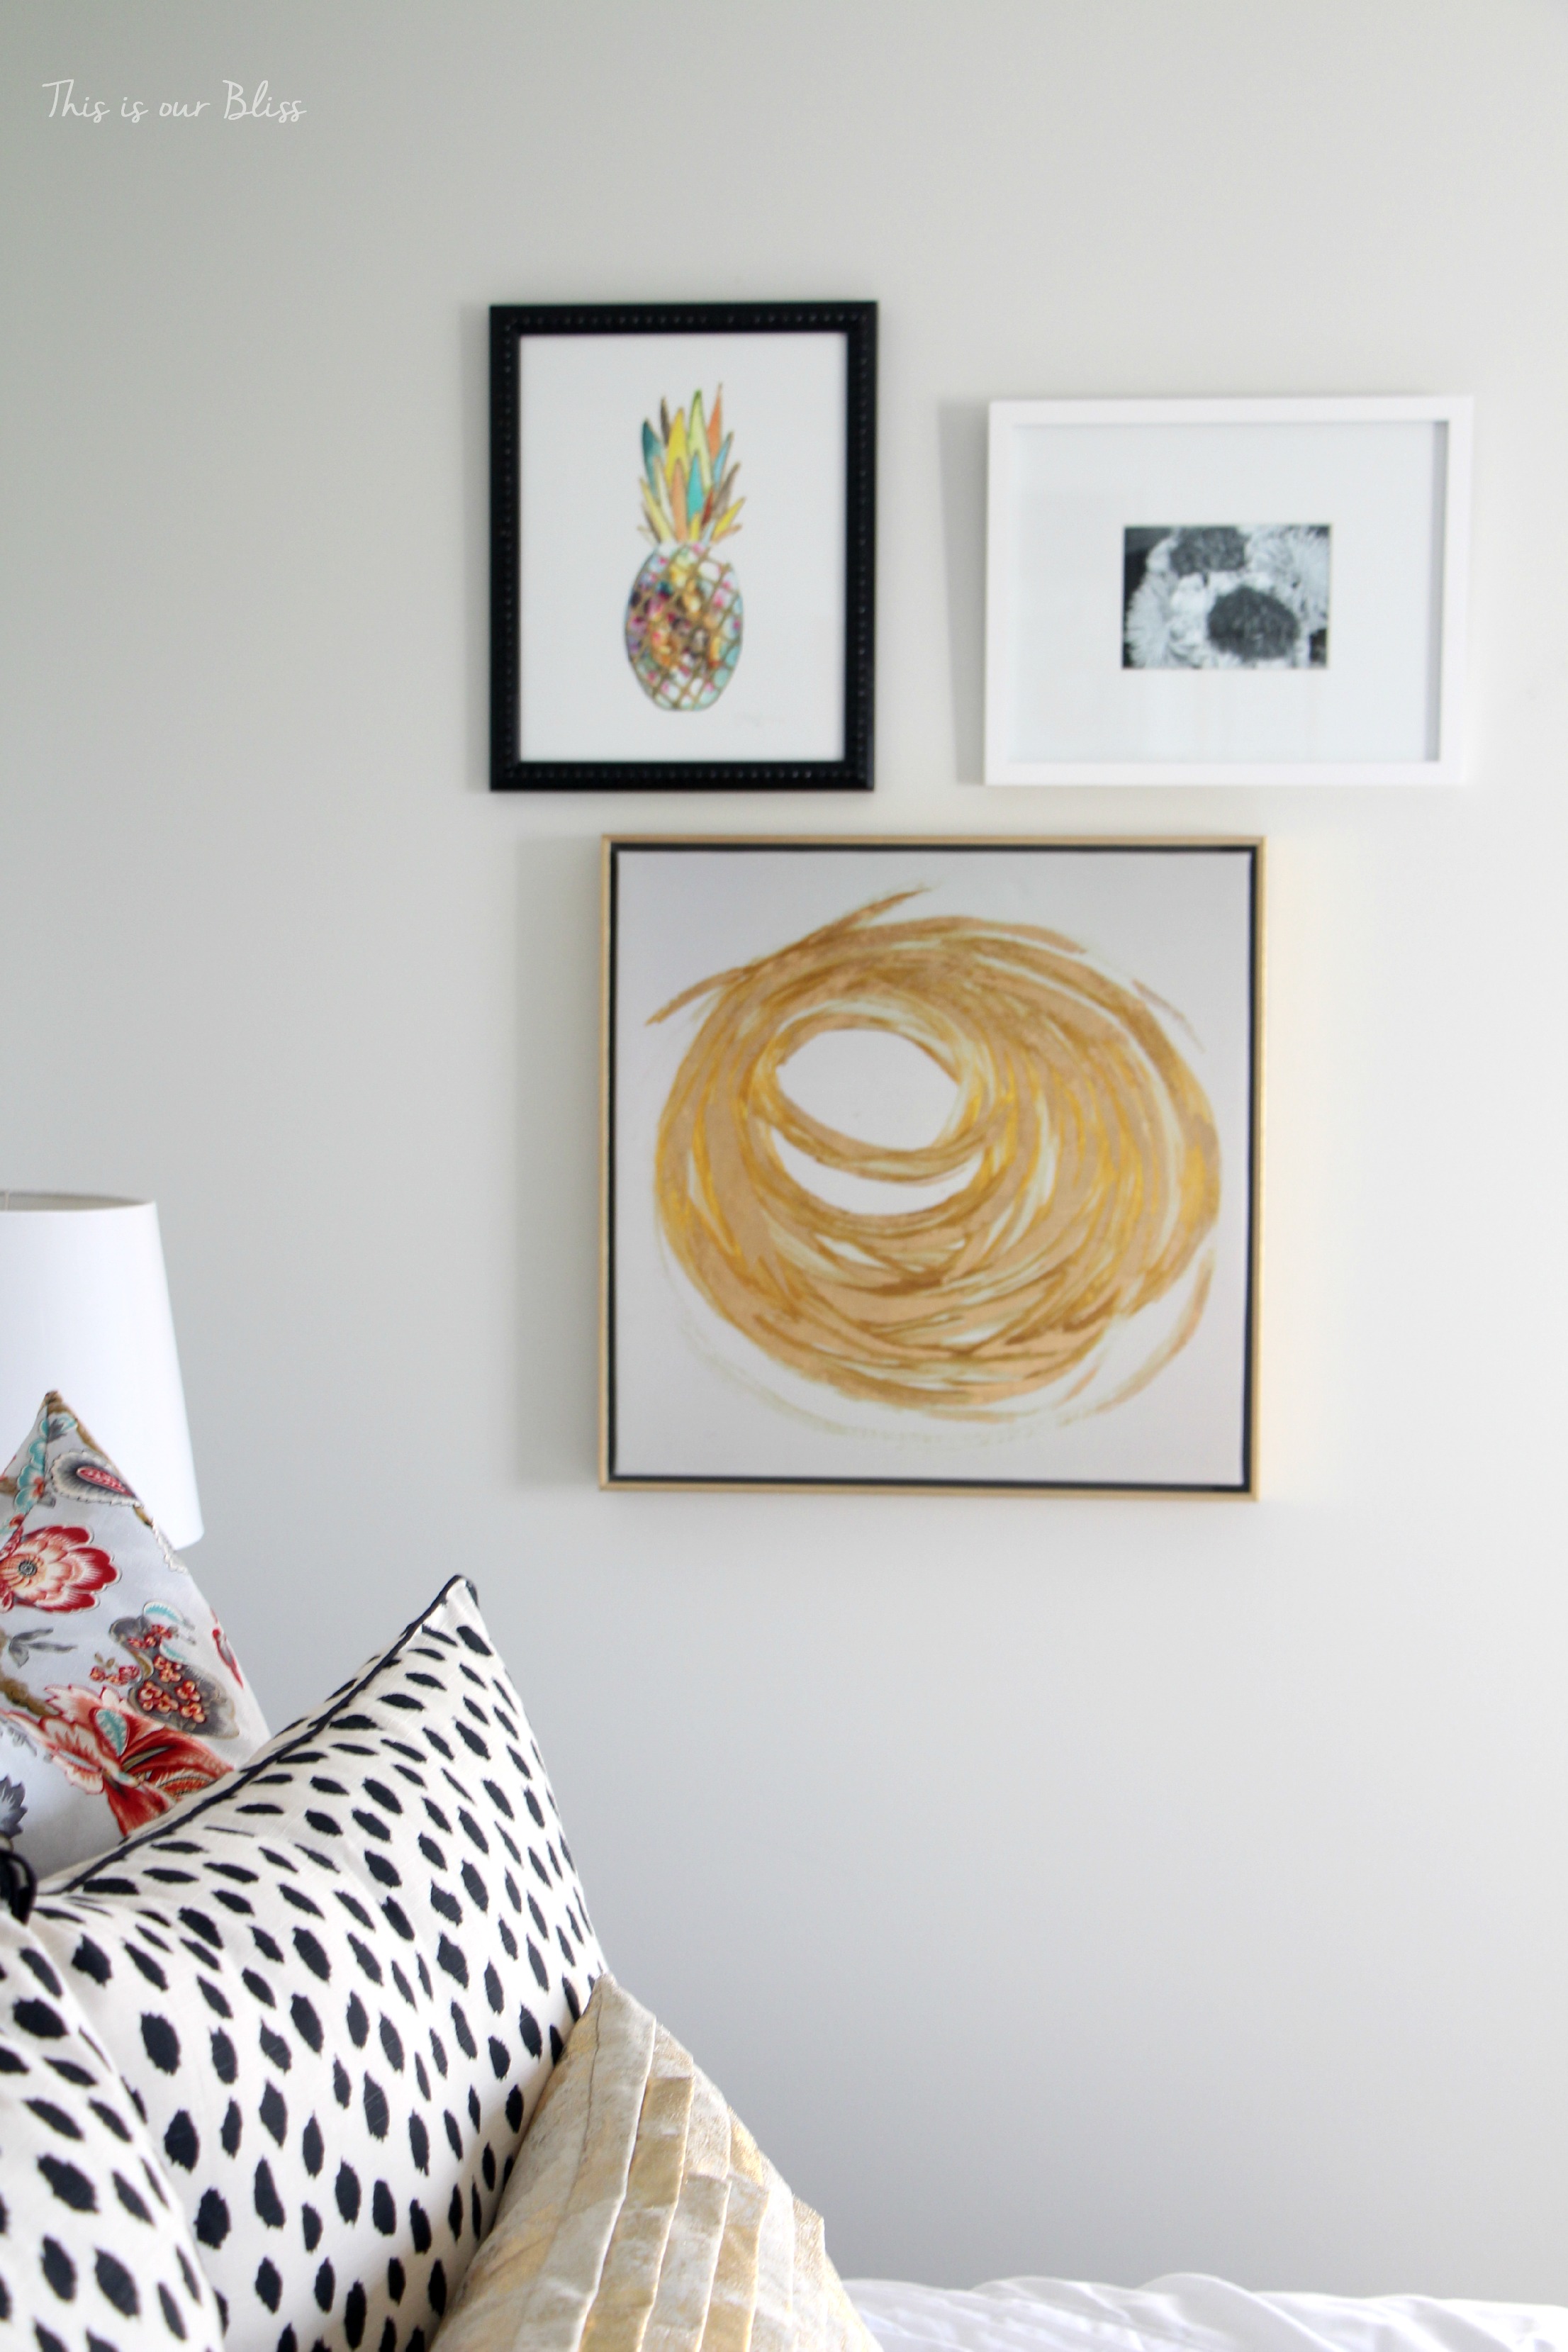 Guestroom revamp - pineapple art - mini gallery wall - This is our Bliss